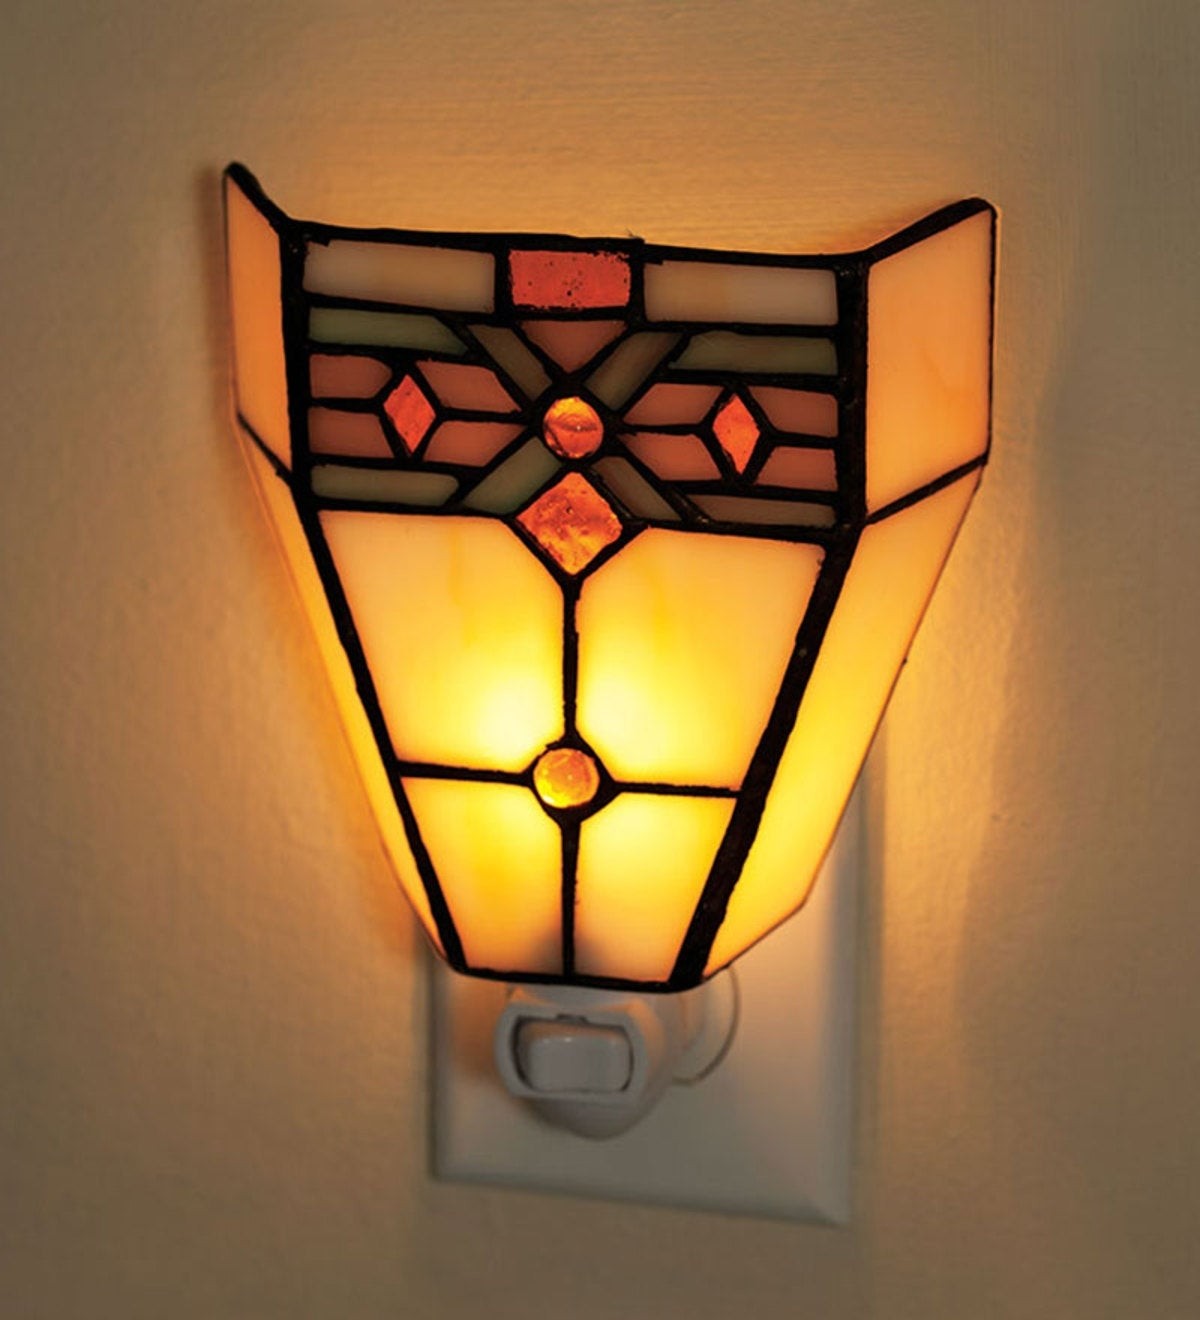 Tiffany style stained glass mission style night light